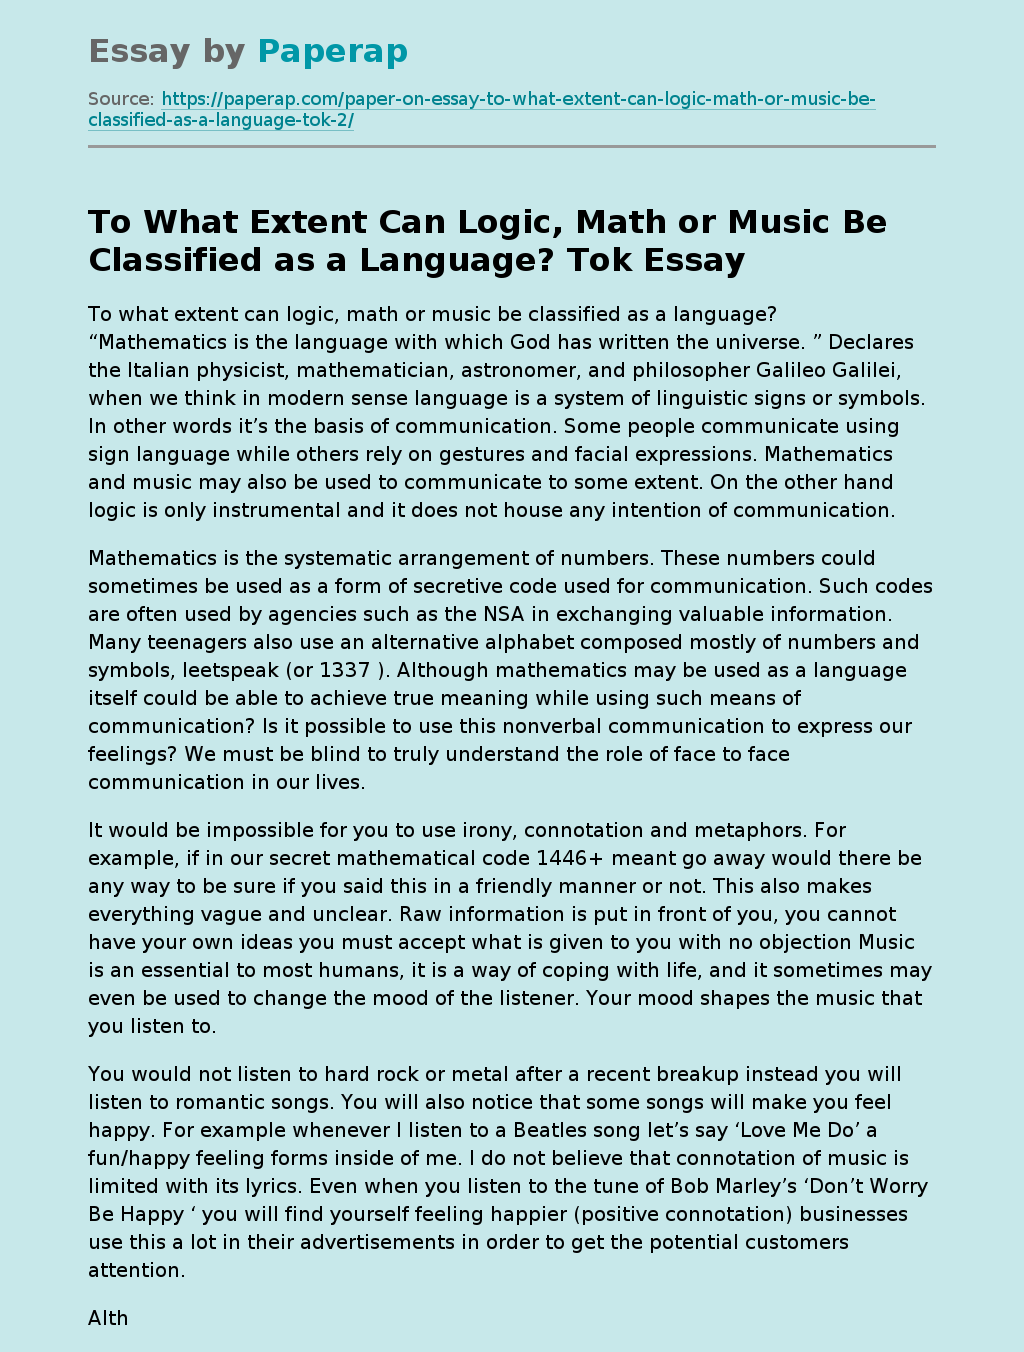 To What Extent Can Logic, Math or Music Be Classified as a Language? Tok